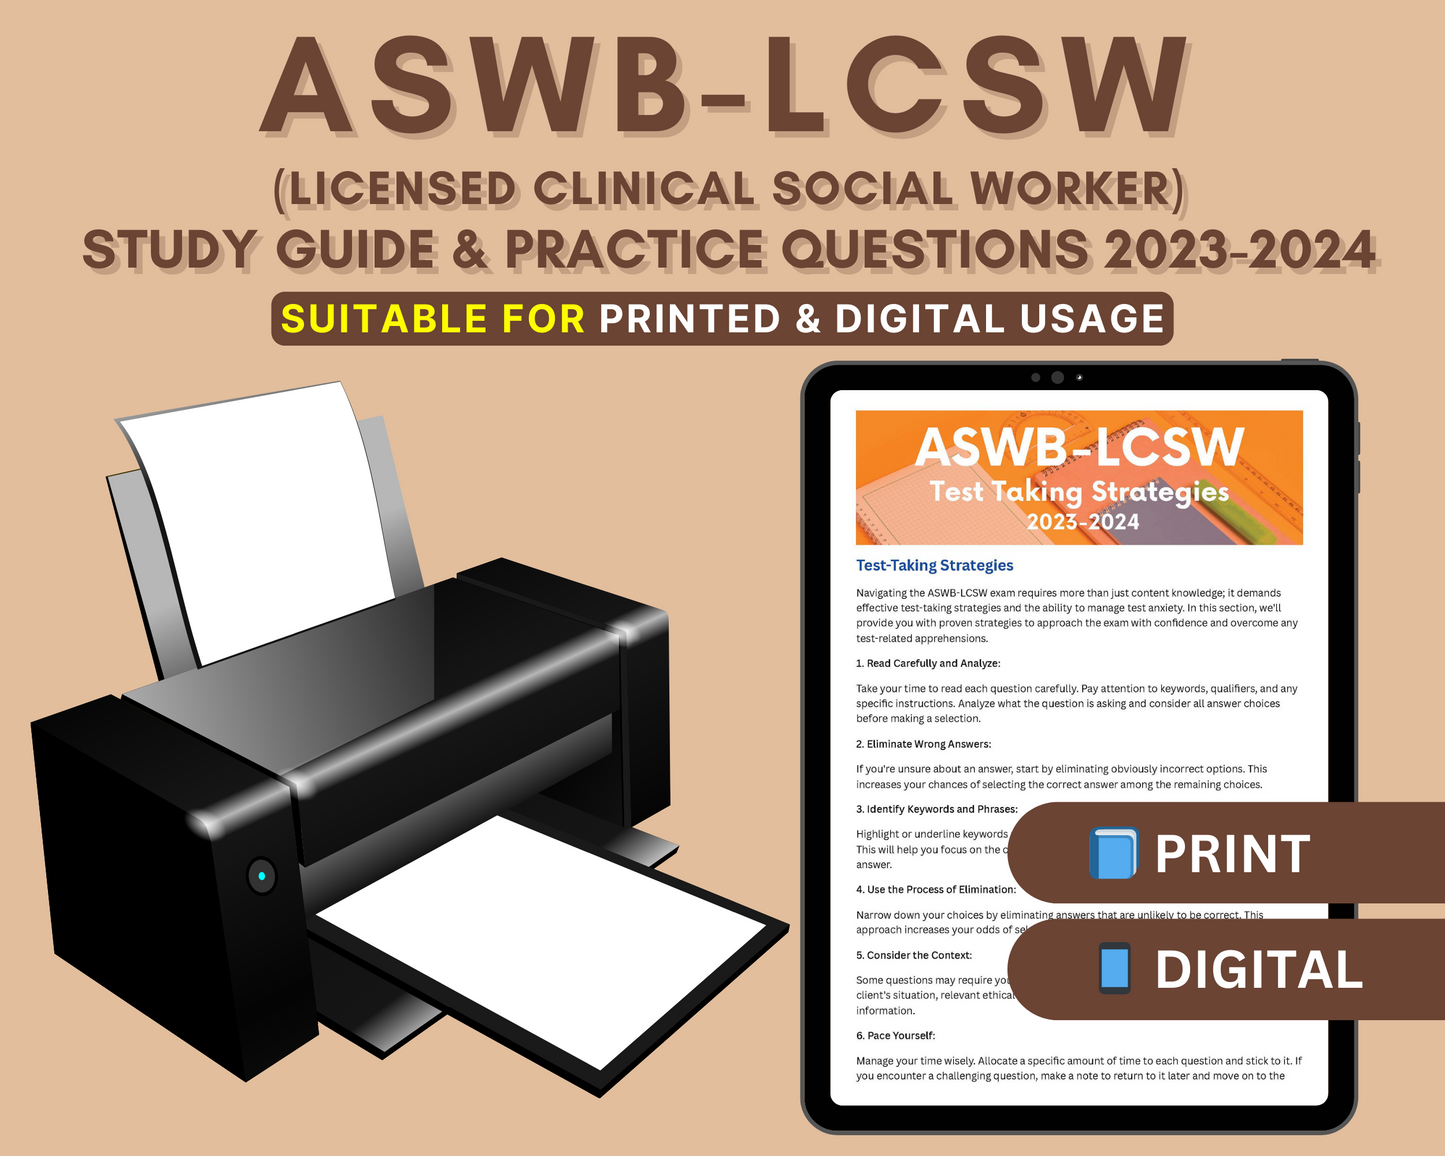 LCSW Clinical Exam Study Guide 2023-2024: In-Depth Review, Practice Tests & Strategies for Licensed Clinical Social Worker - ASWB LCSW Exam